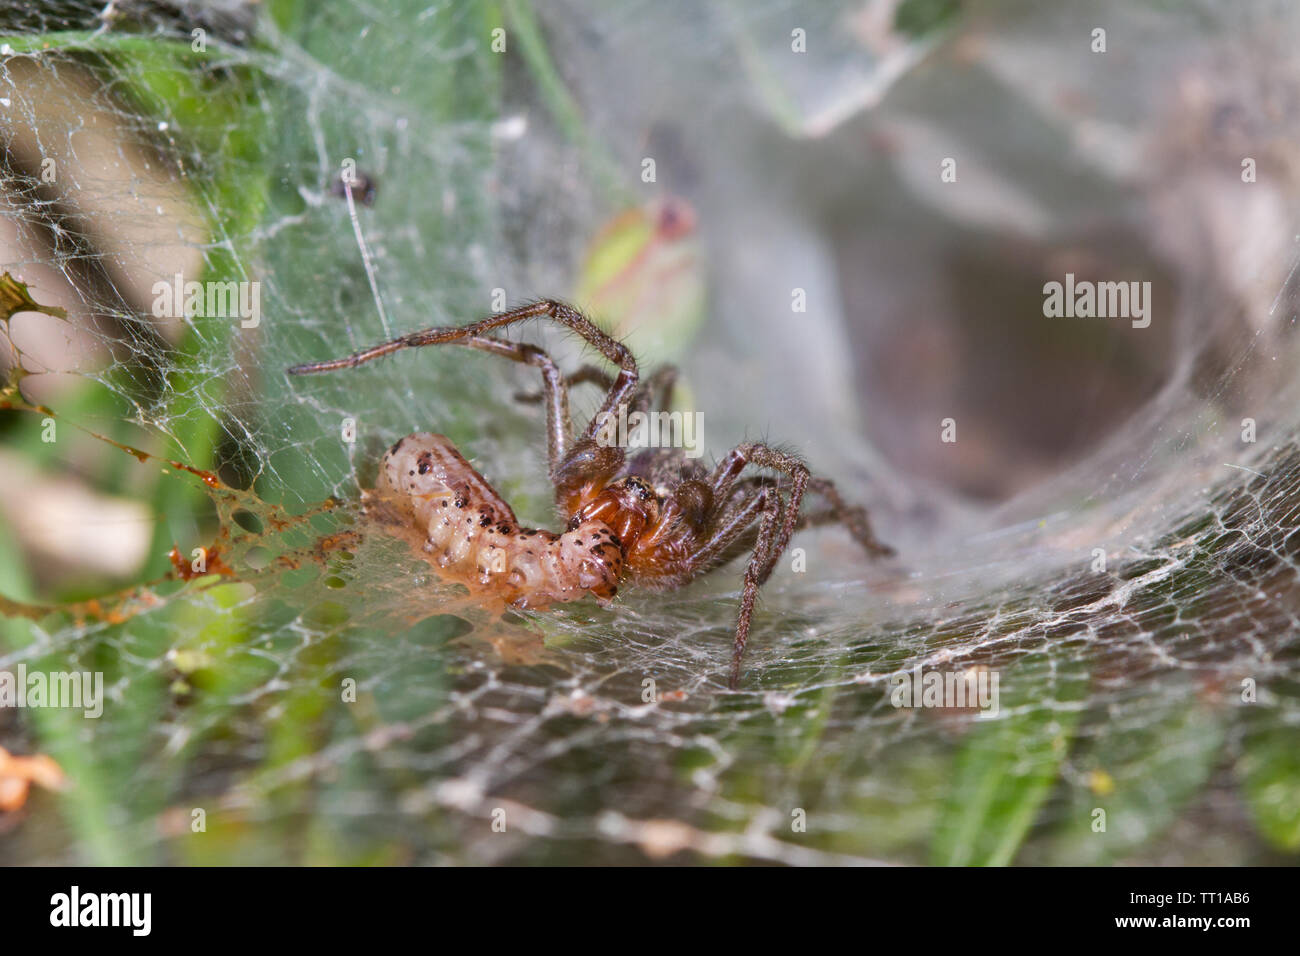 Funnel-web spider, Agelena labyrinthica, caught a caterpillar in its web Stock Photo